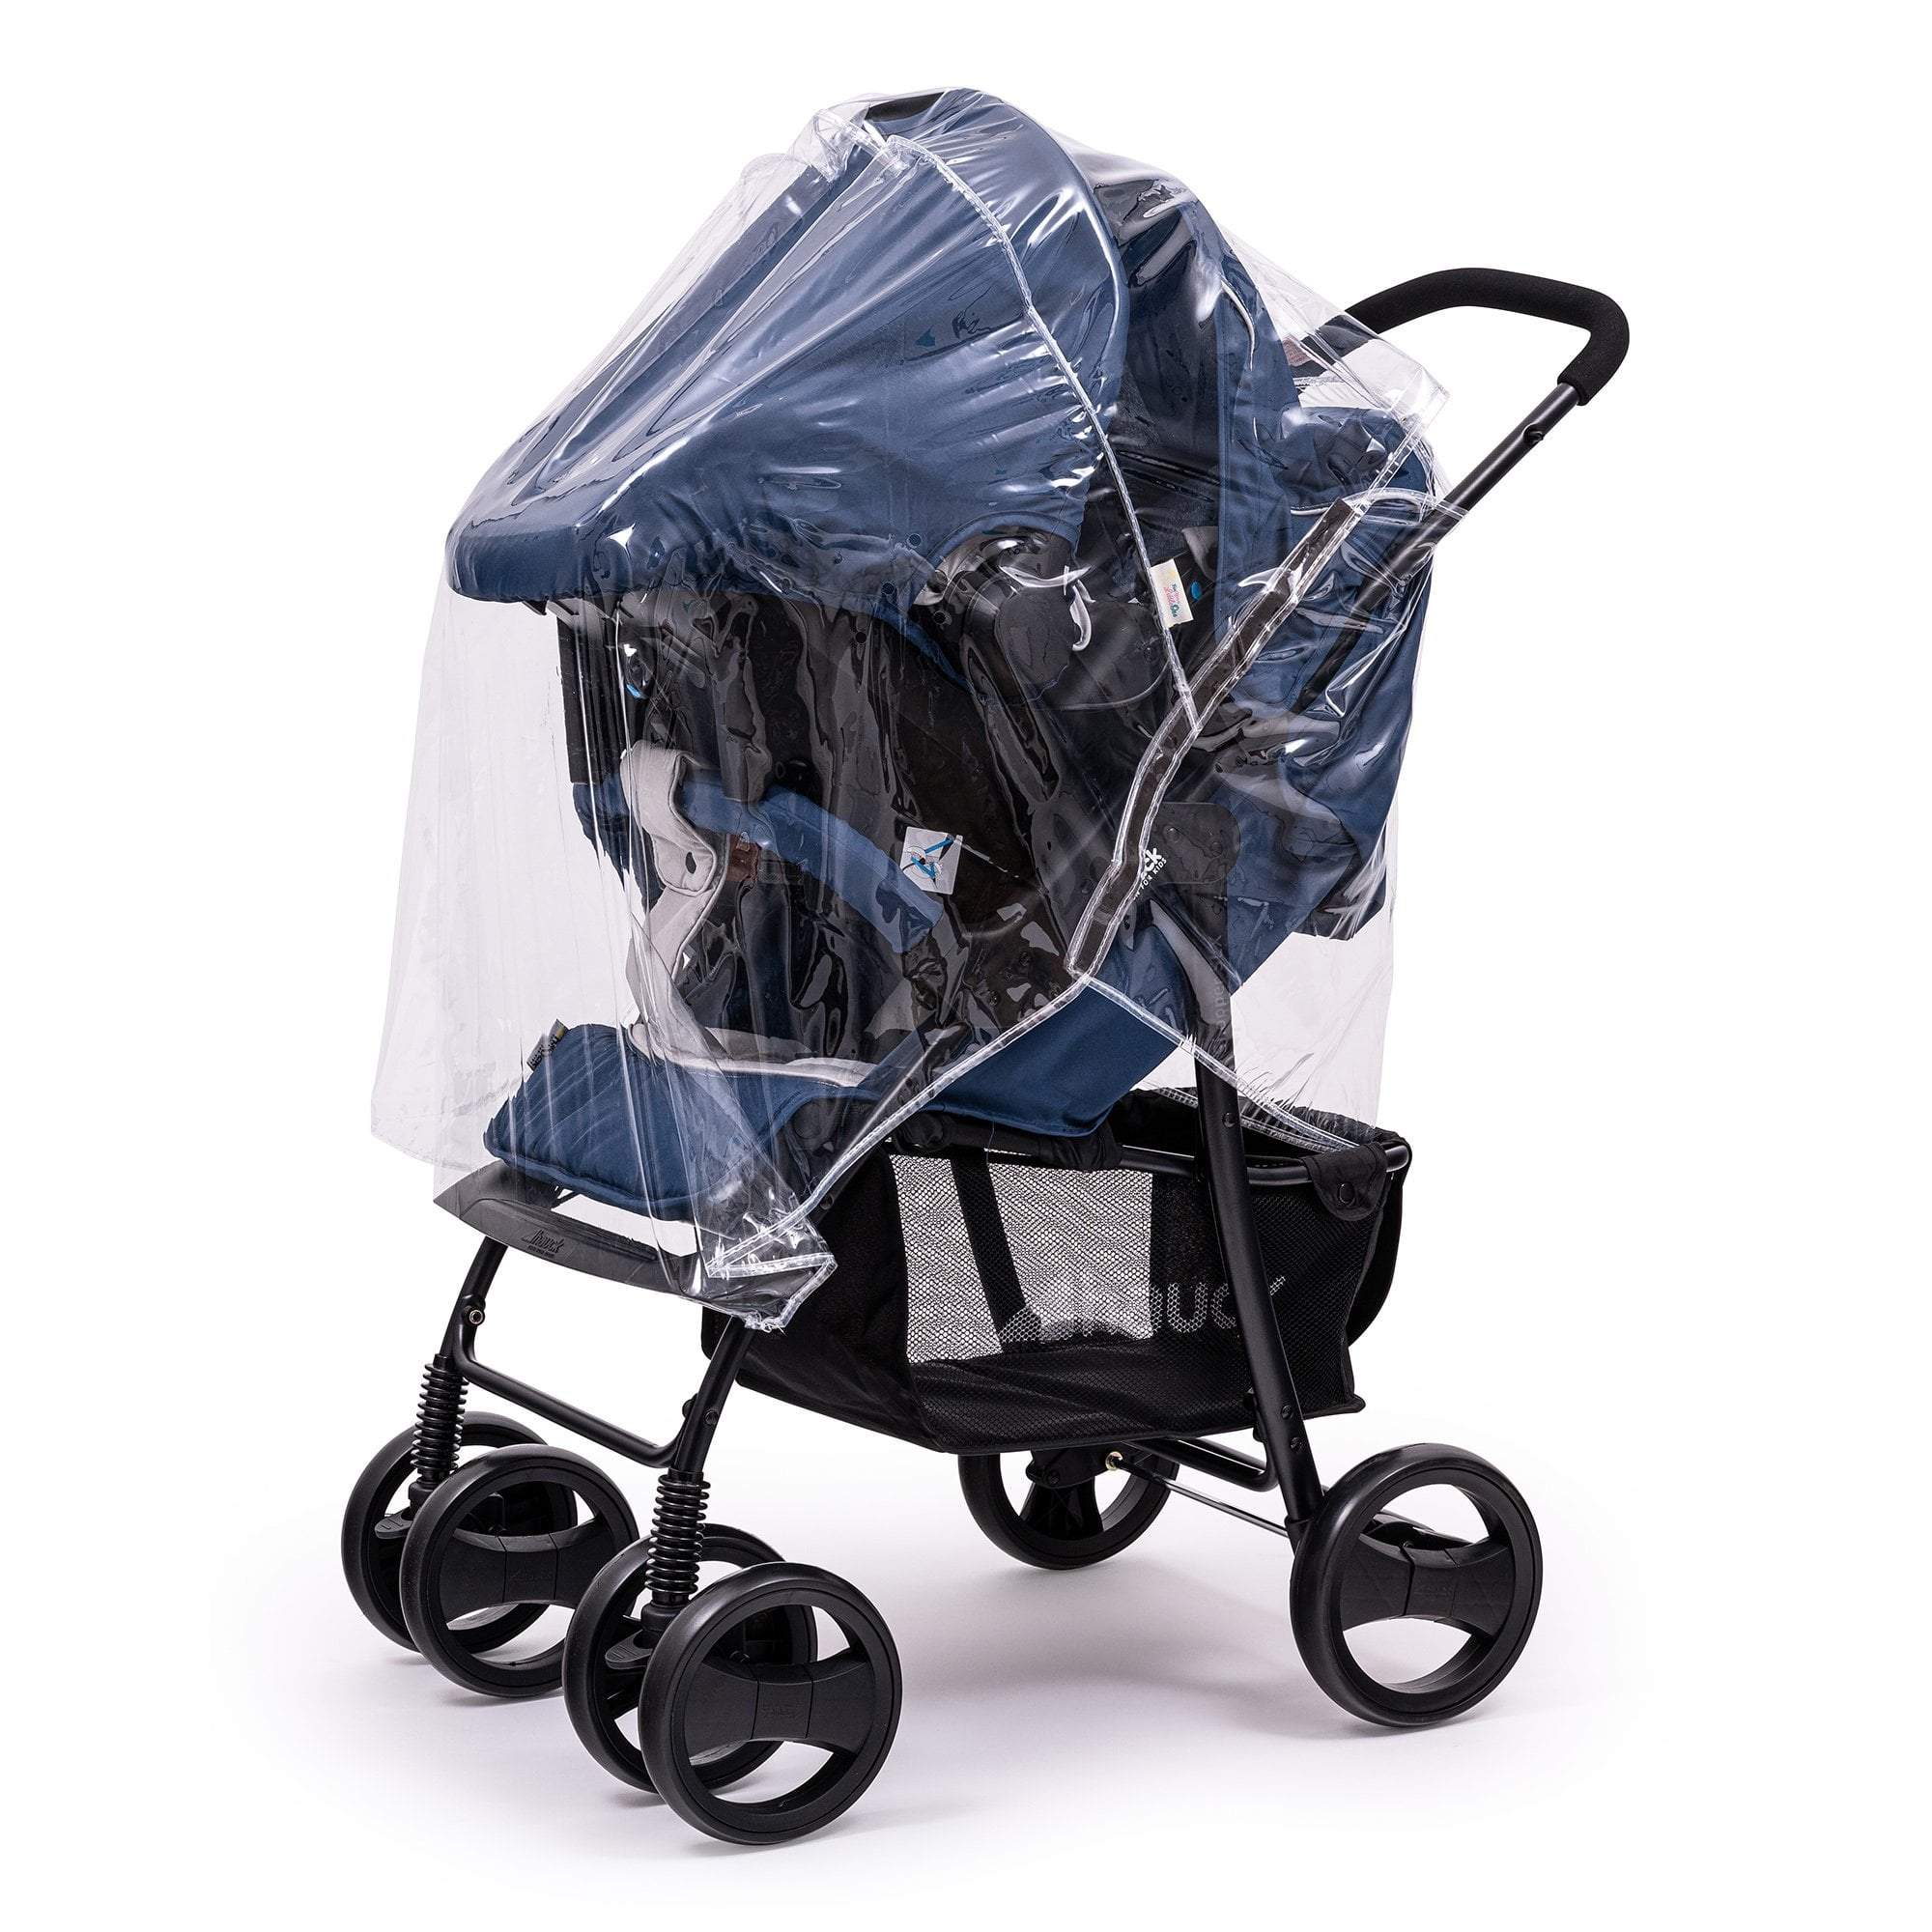 Travel System Raincover Compatible with Phil & Teds - Fits All Models - For Your Little One